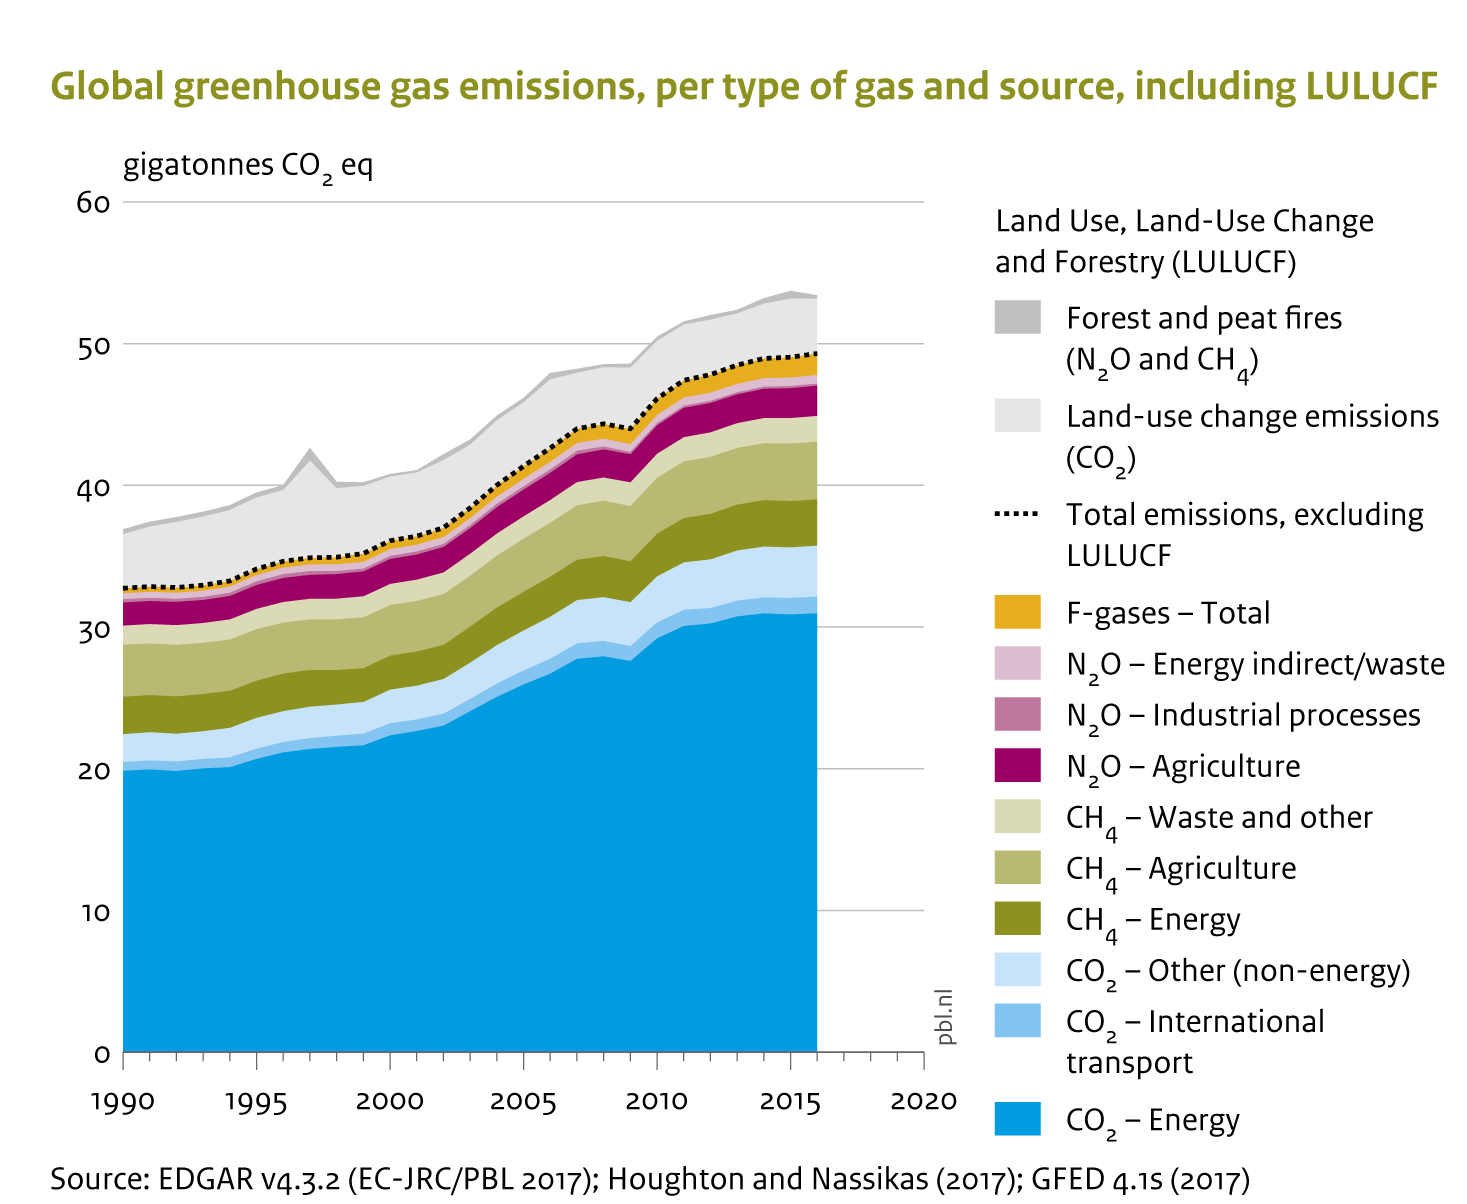 In 2016, total global greenhouse gas emissions continued to increase slowly by about 0.5% (+/-1%), to about 49.3 gigatonnes in CO2 equivalent (Gt CO2 eq).